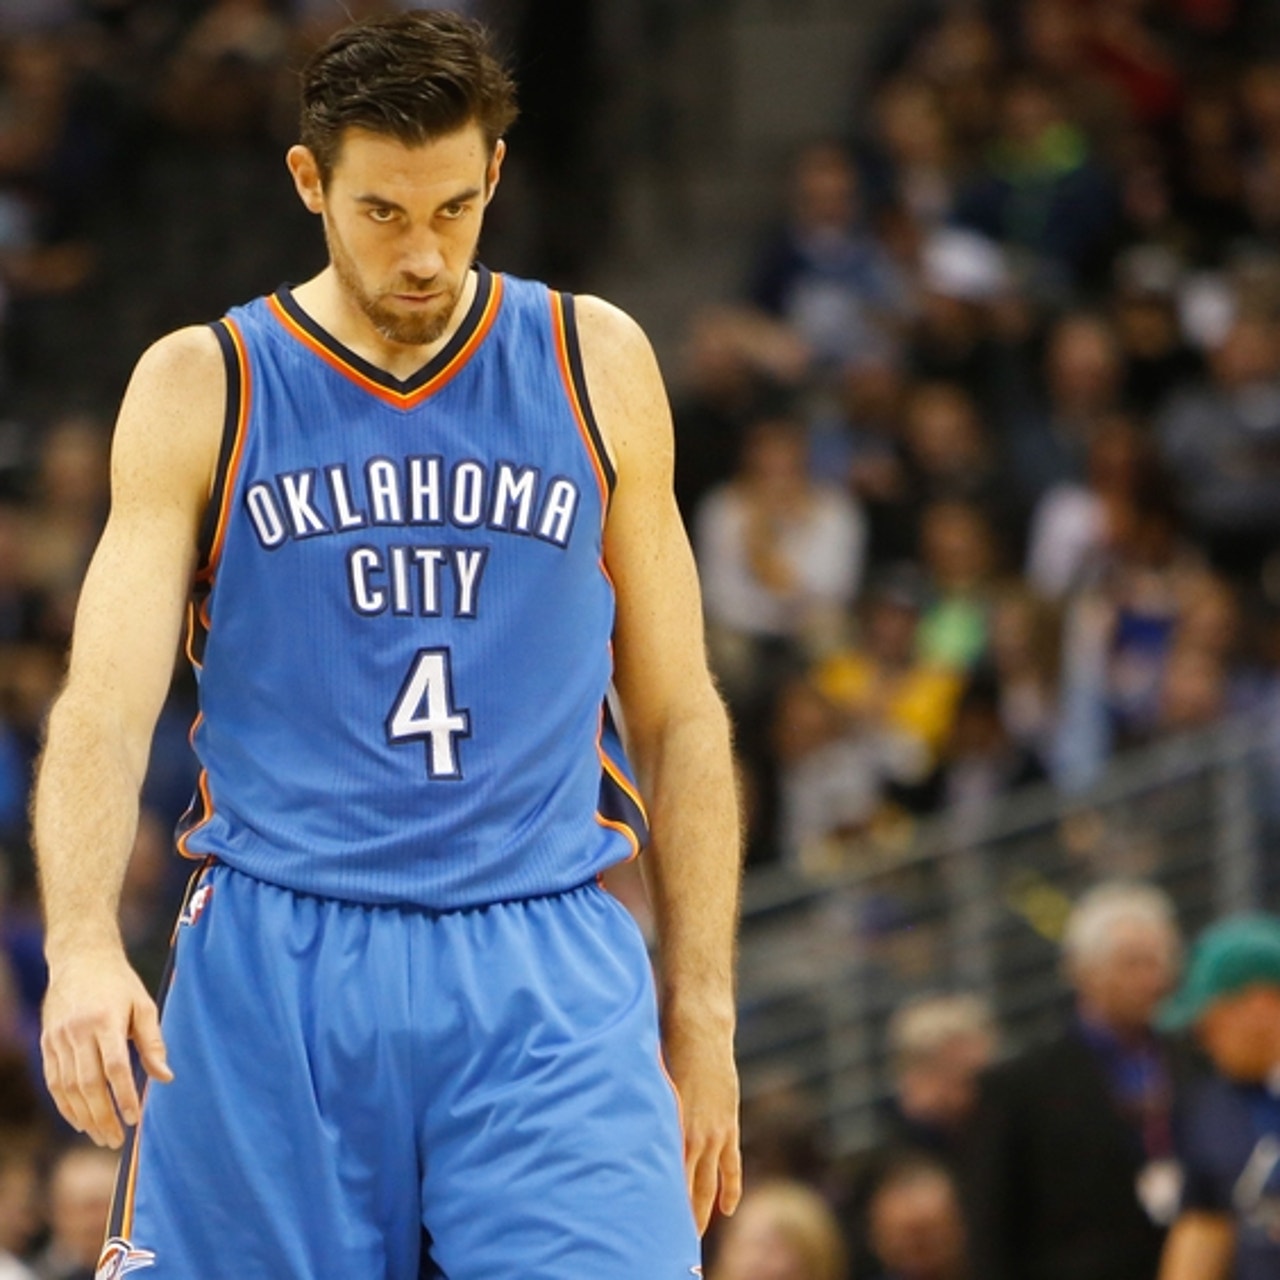 Loyal Number 4 – A Look Inside Nick Collison's Number Retirement Day